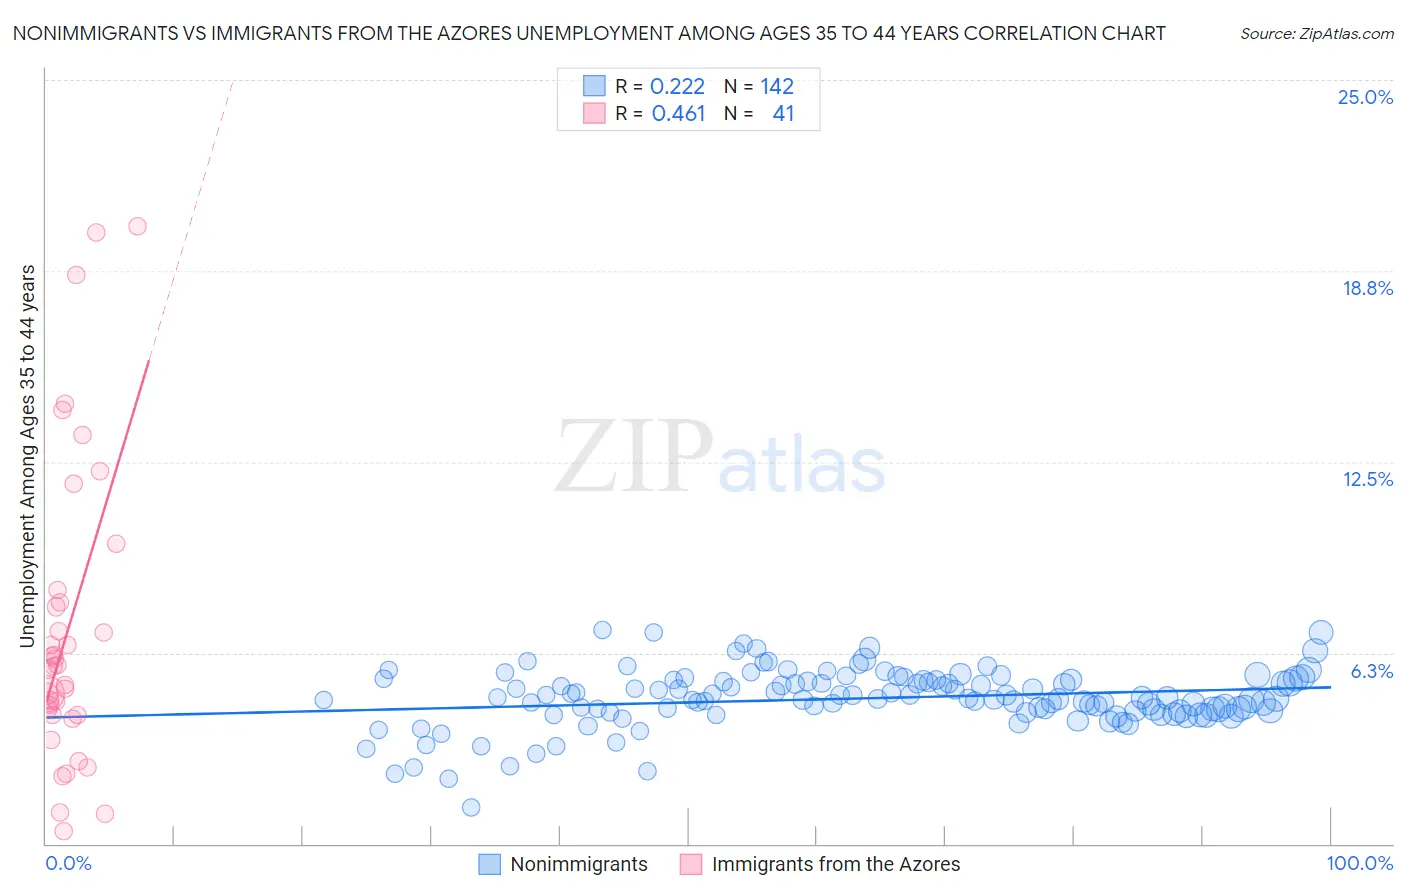 Nonimmigrants vs Immigrants from the Azores Unemployment Among Ages 35 to 44 years